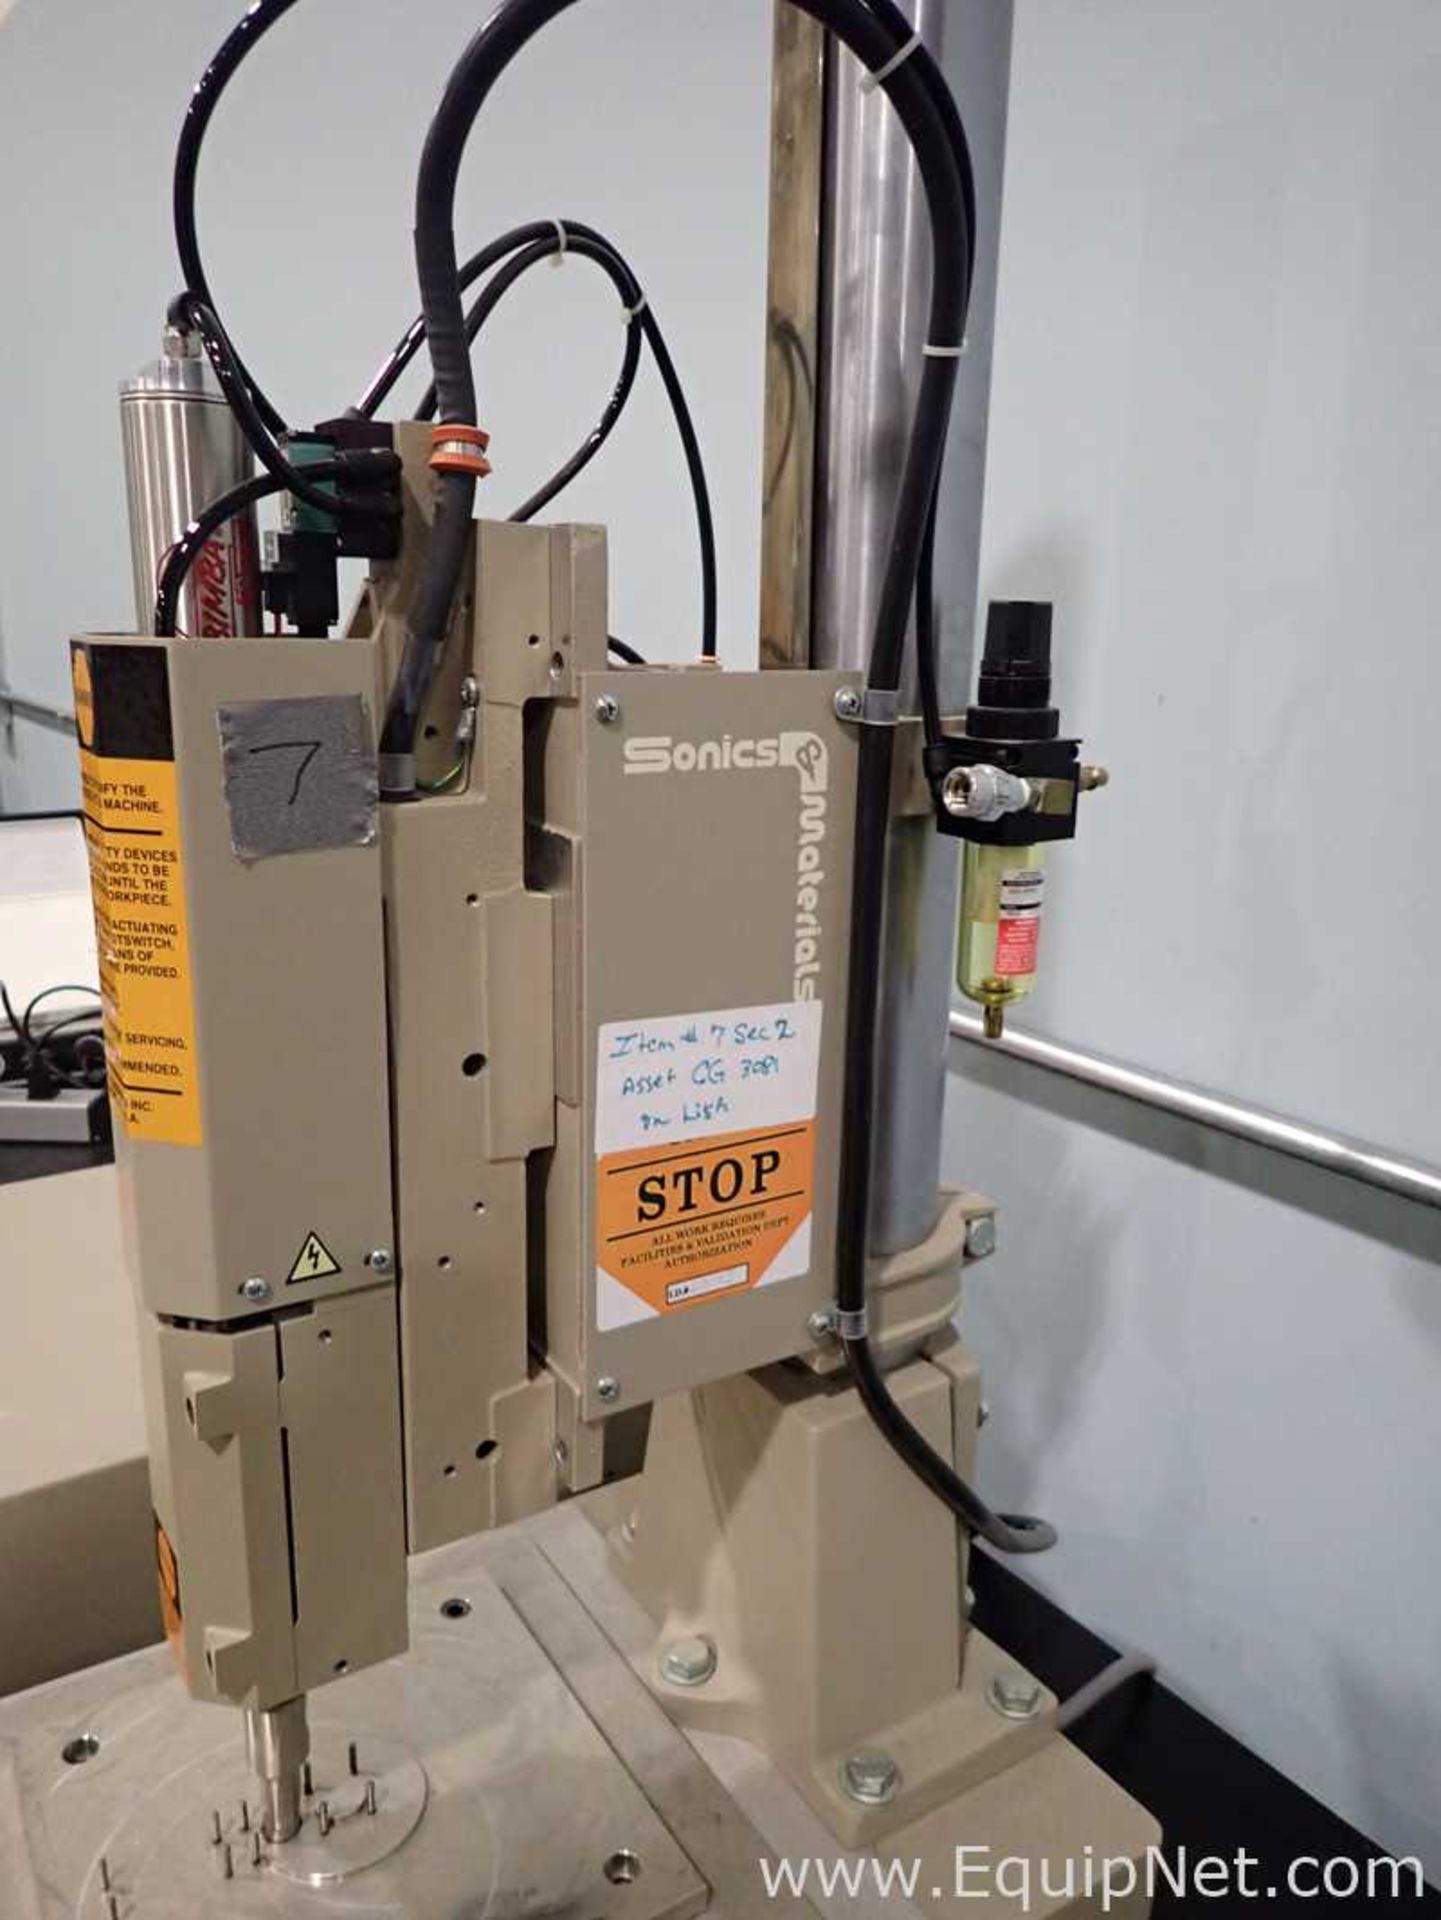 Sonics and Materials 4095 Pneumatic Press with Microsonic Processor for Ultrasonic Plastic Assembly - Image 4 of 13